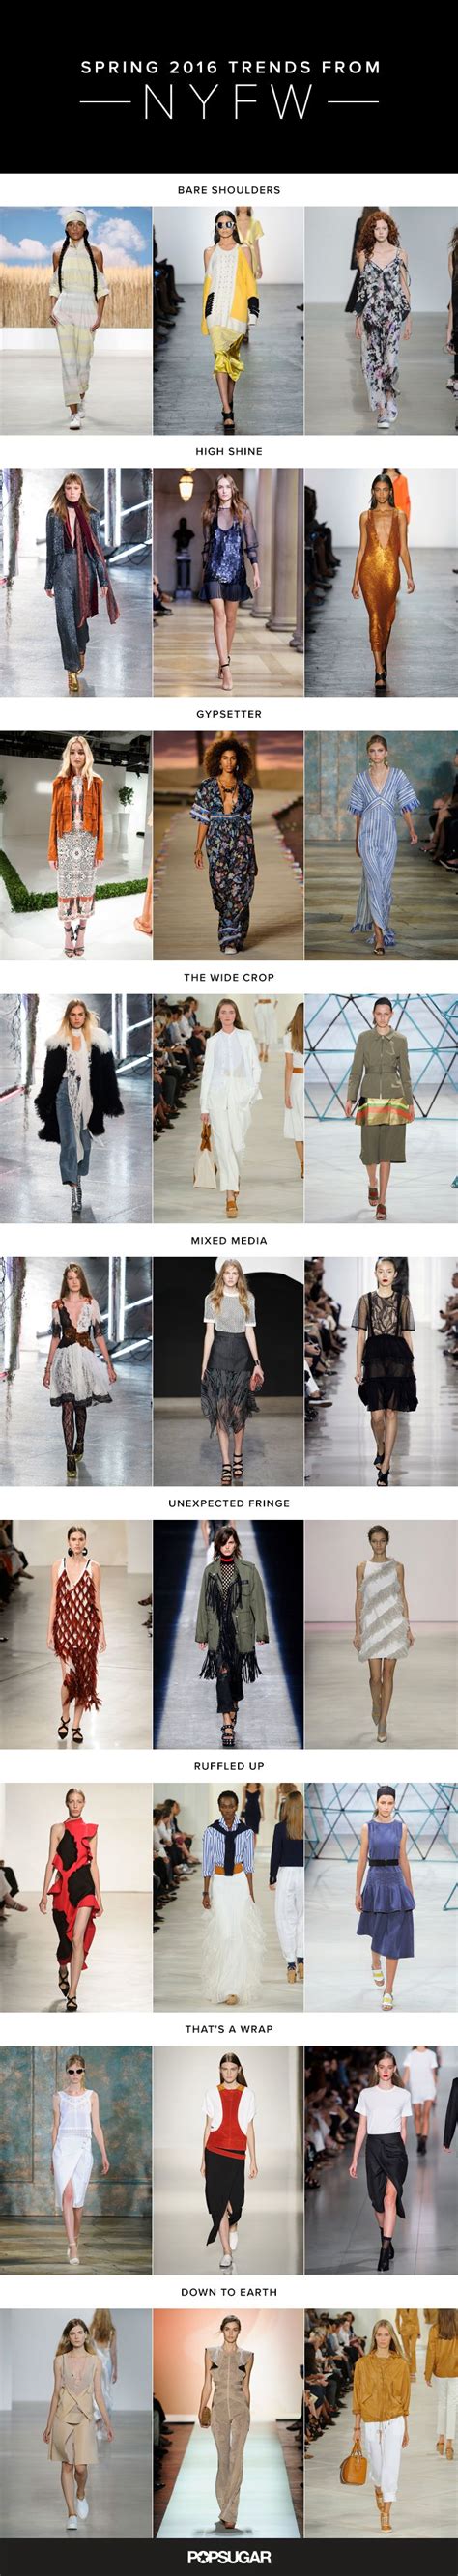 The 9 Biggest Trends From New York Fashion Week New York Fashion Week